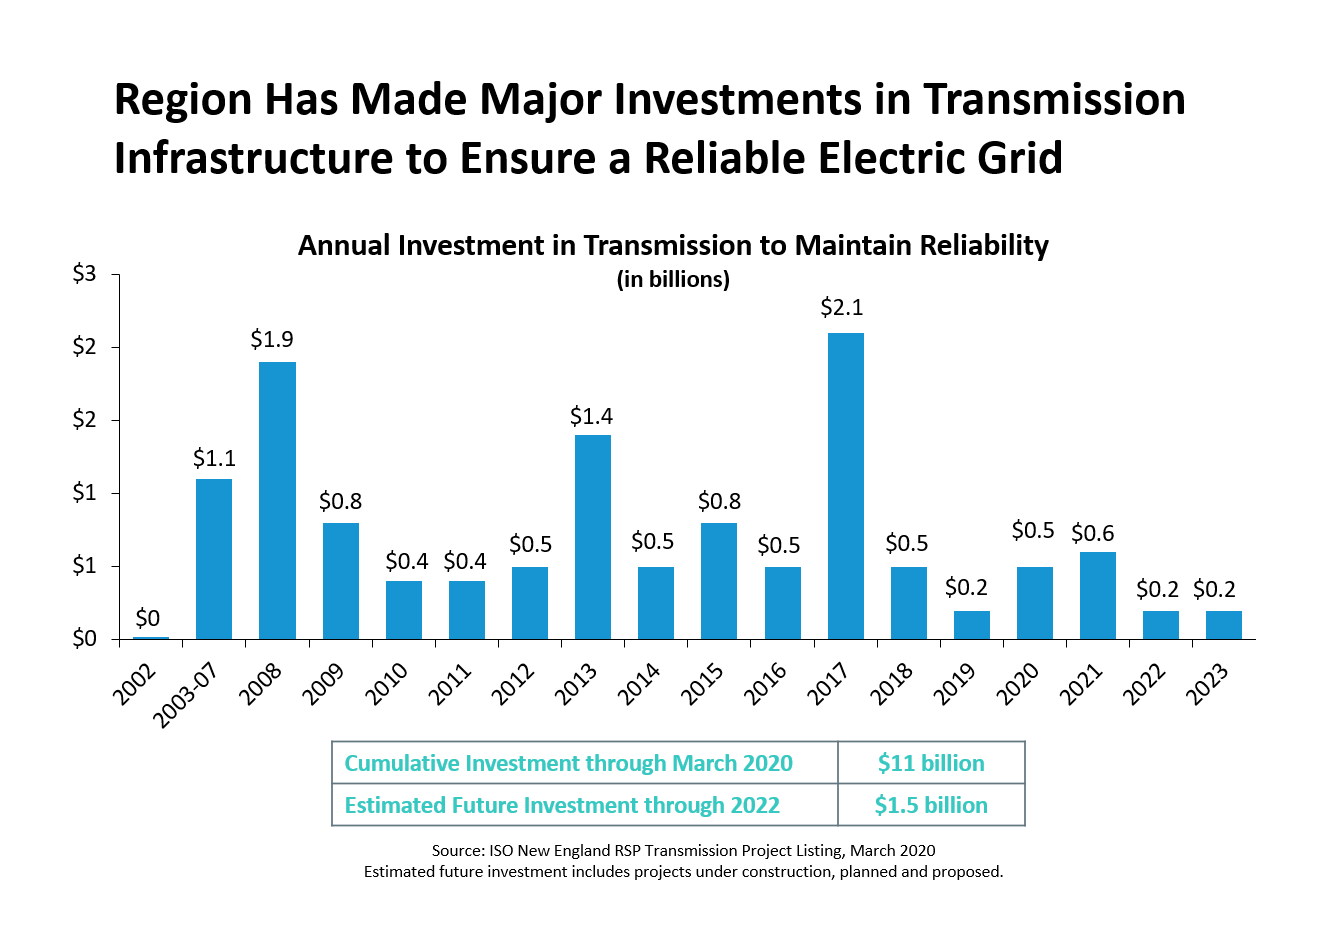 New transmission investment in New England